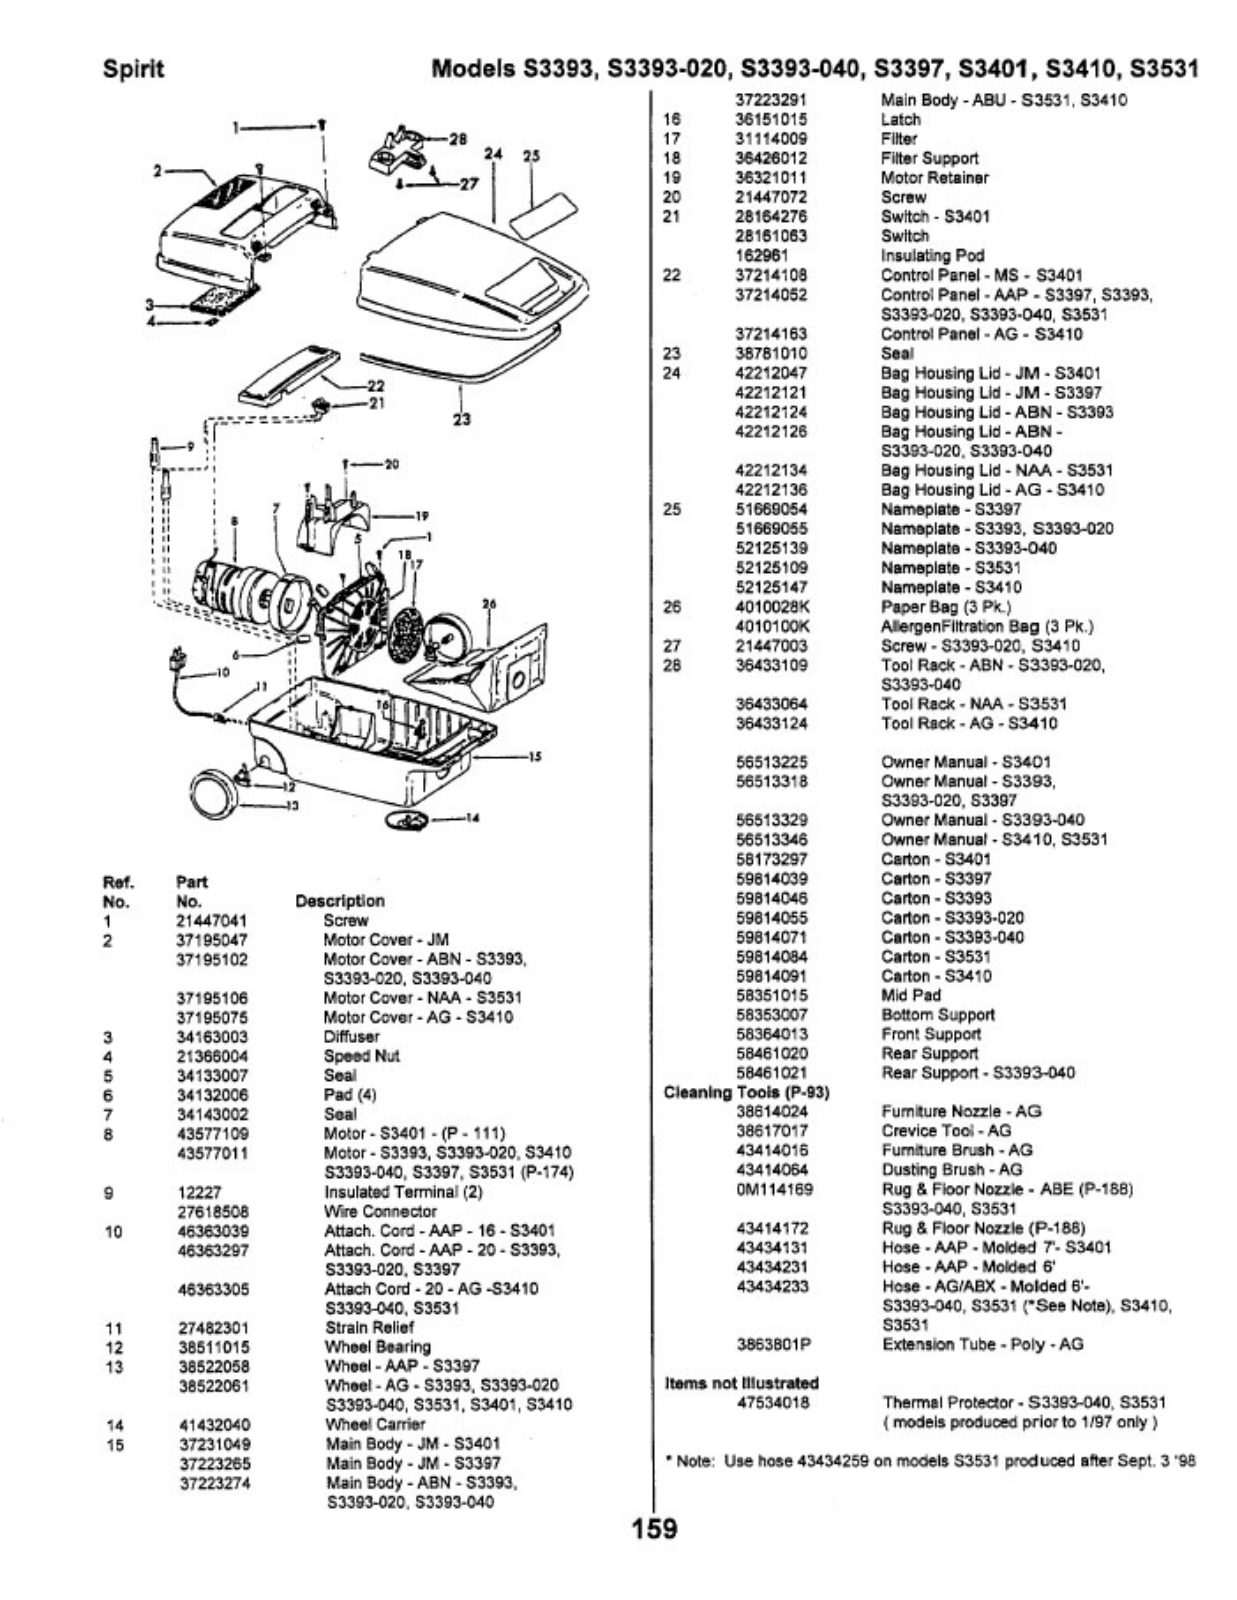 Hoover S3410, S3393, S3531, S3401, S3397 Owner's Manual